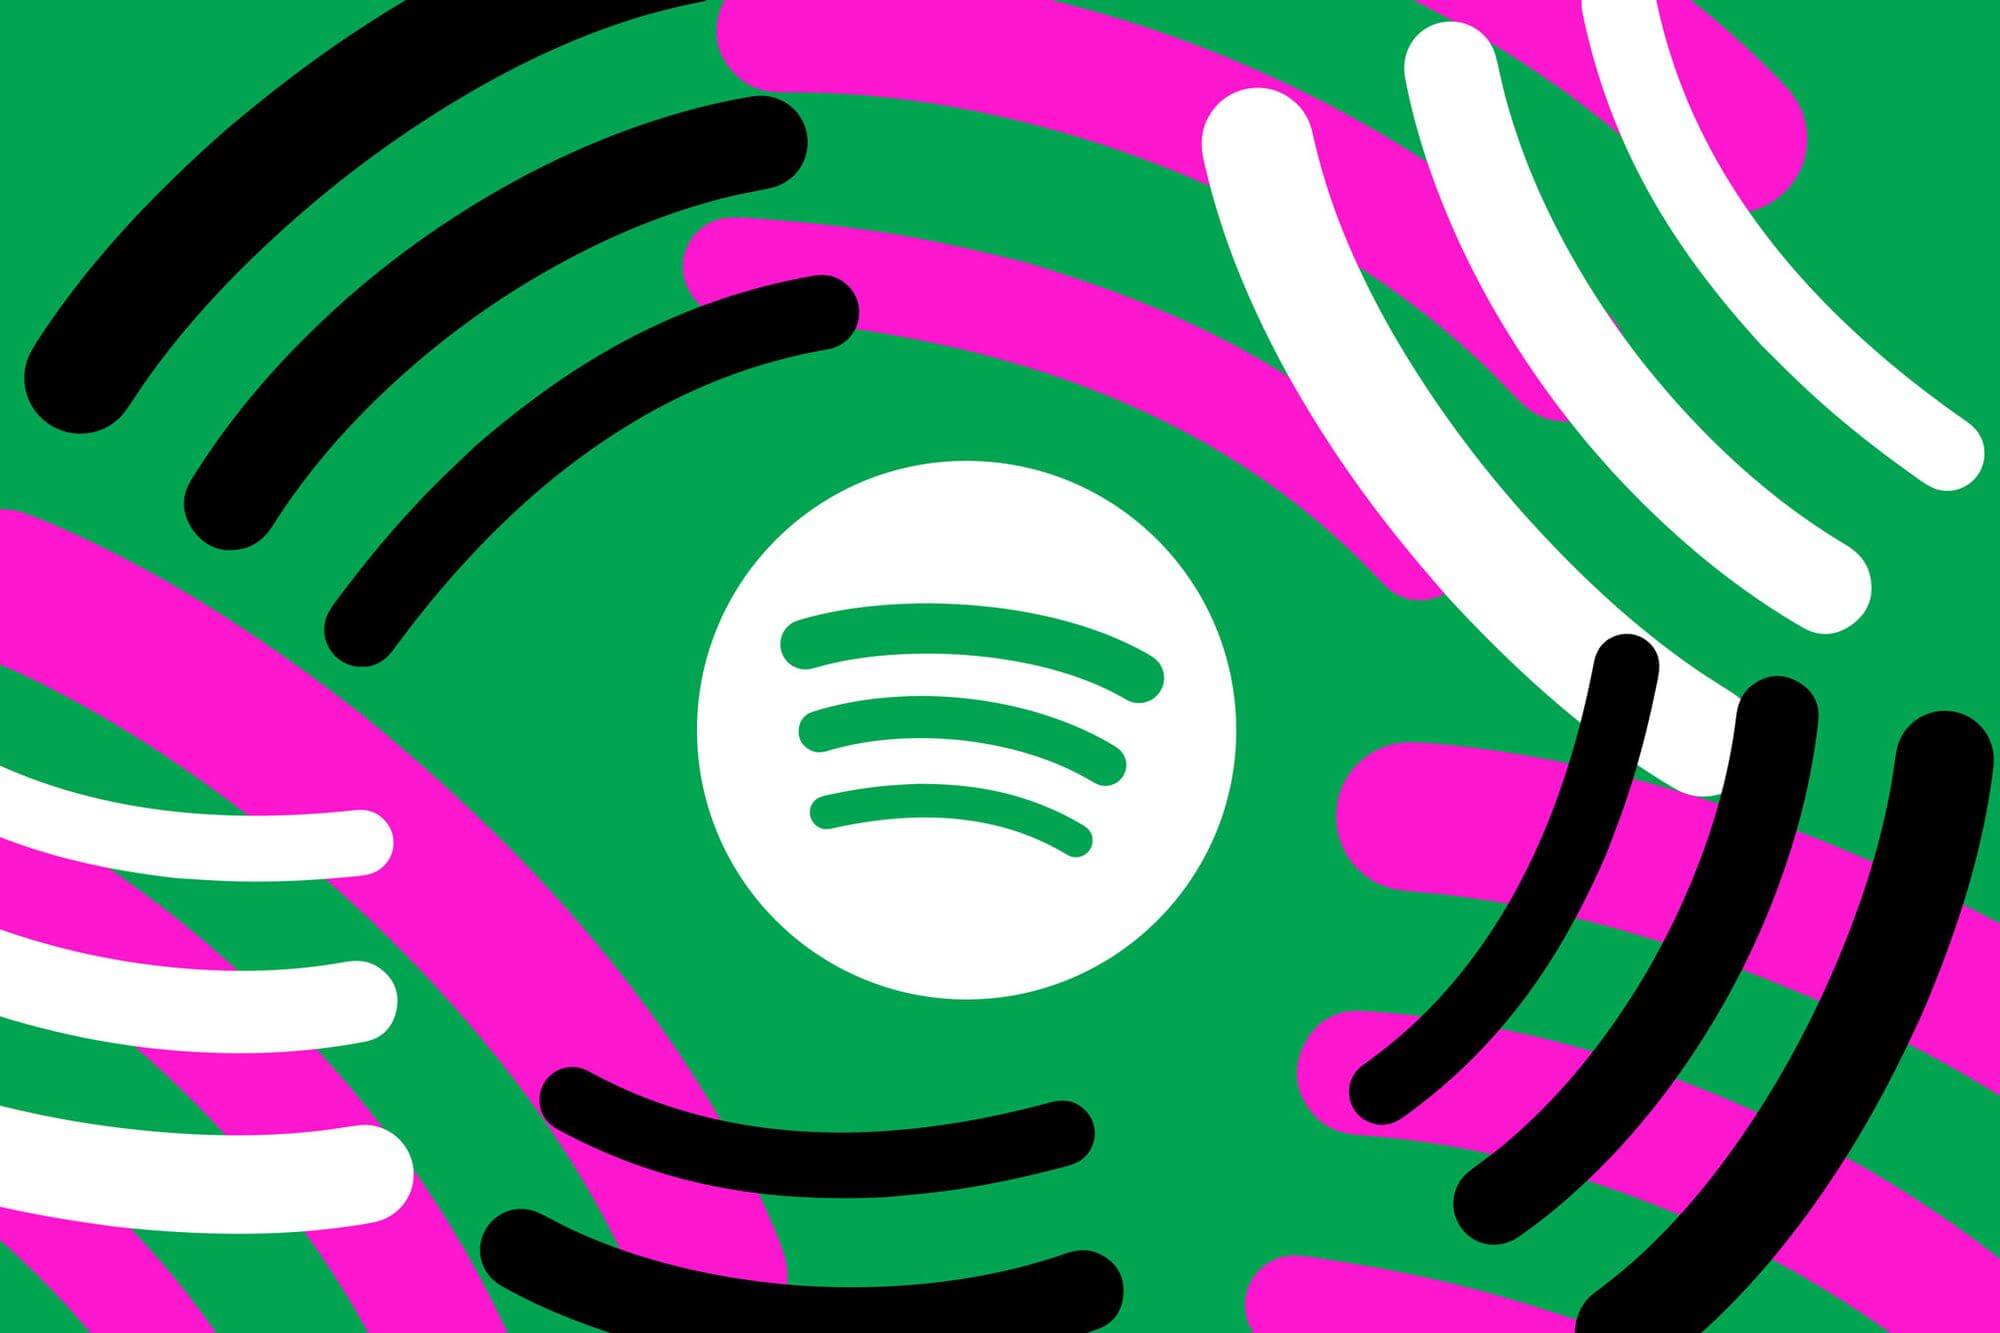  how-to-unhide-a-song-on-spotify-problems  